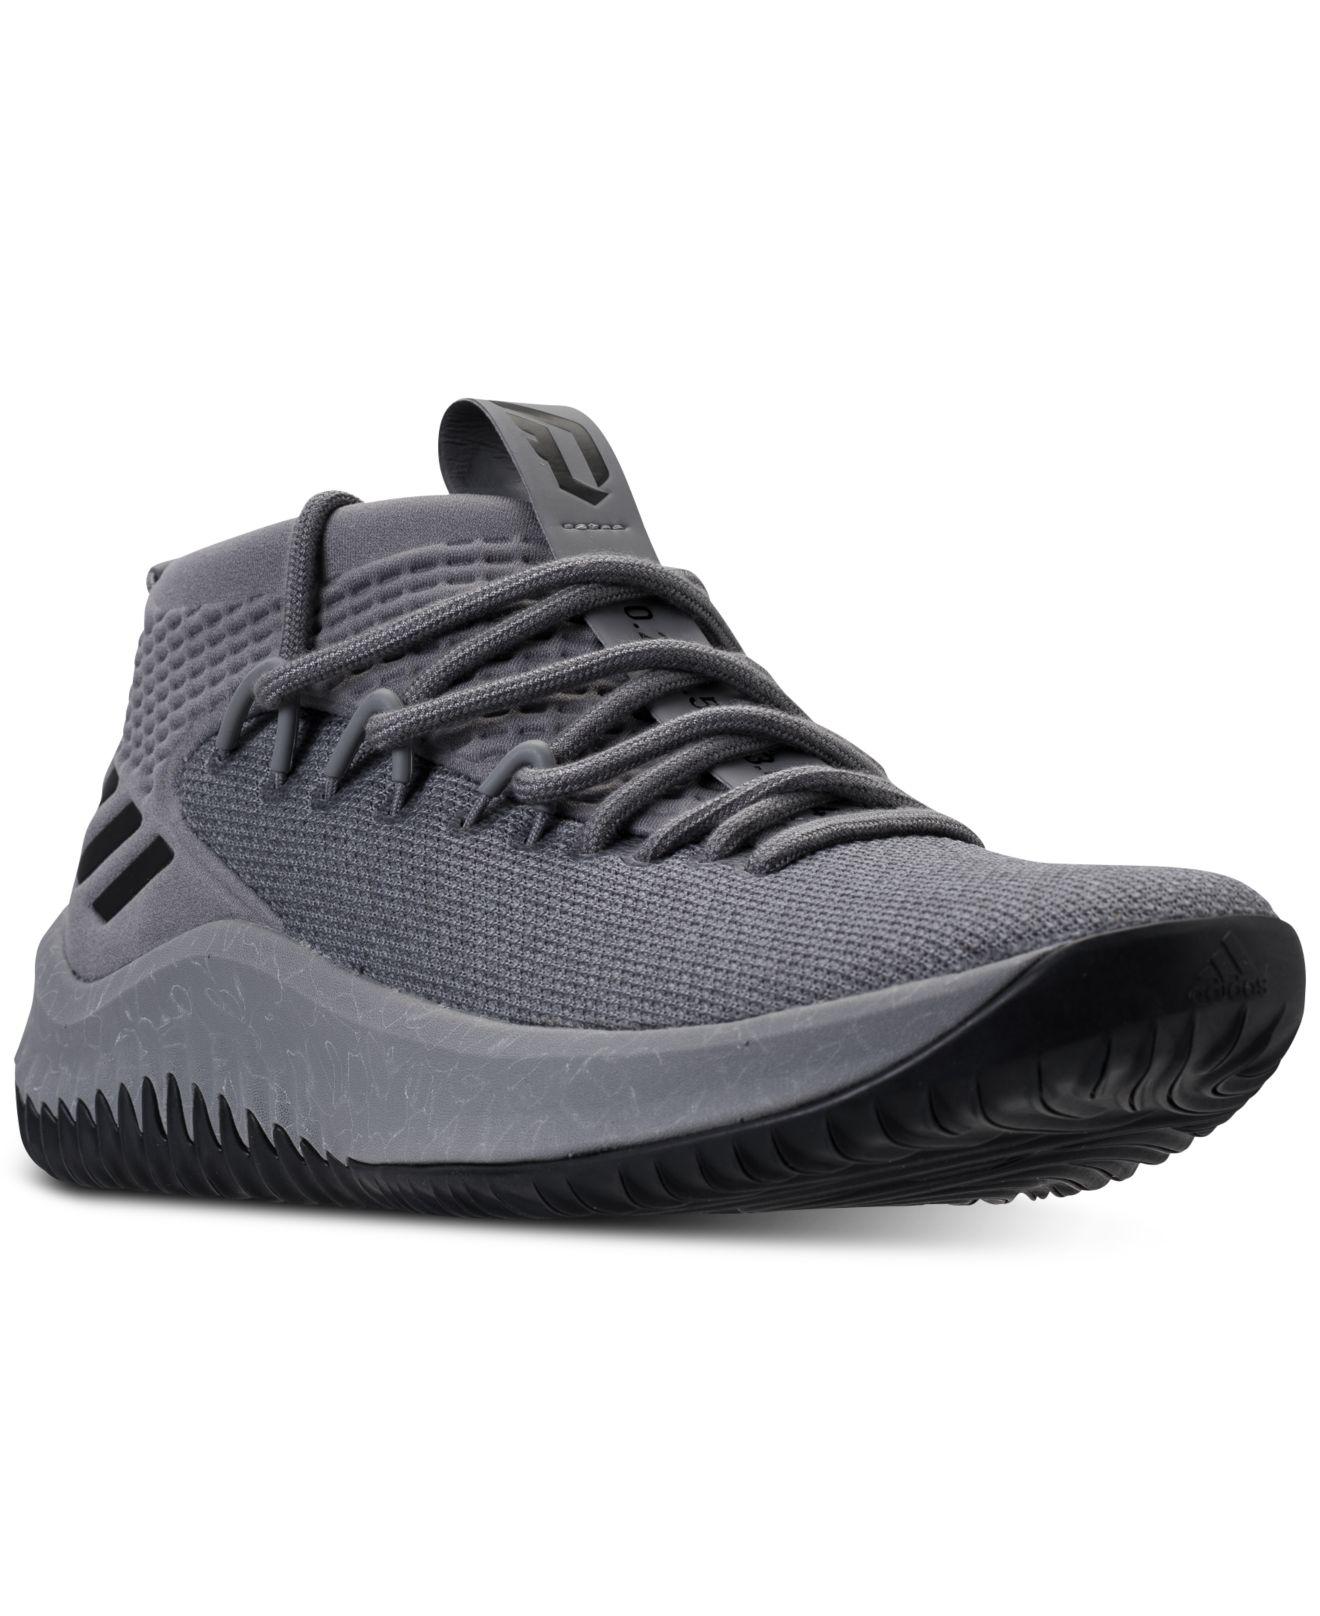 adidas Rubber Dame 4 Basketball Sneakers From Finish Line in  Grey/Black/Grey (Gray) for Men - Lyst